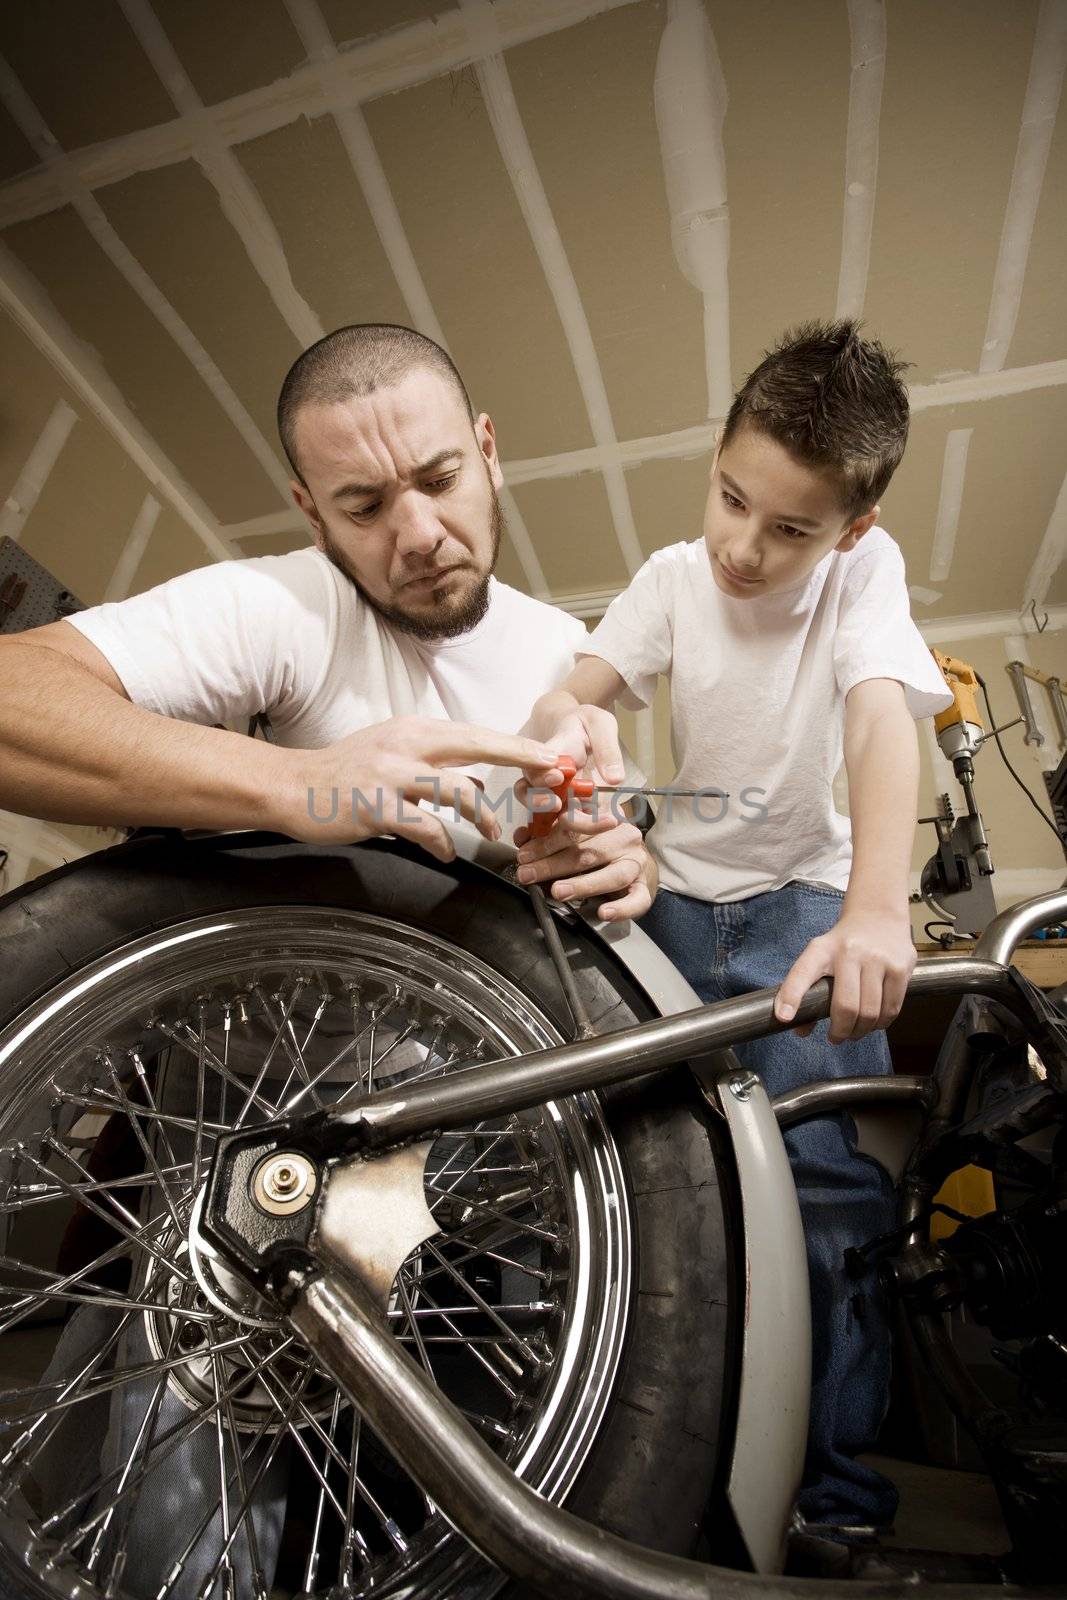 Hispanic father and son working on motorcycle in garage